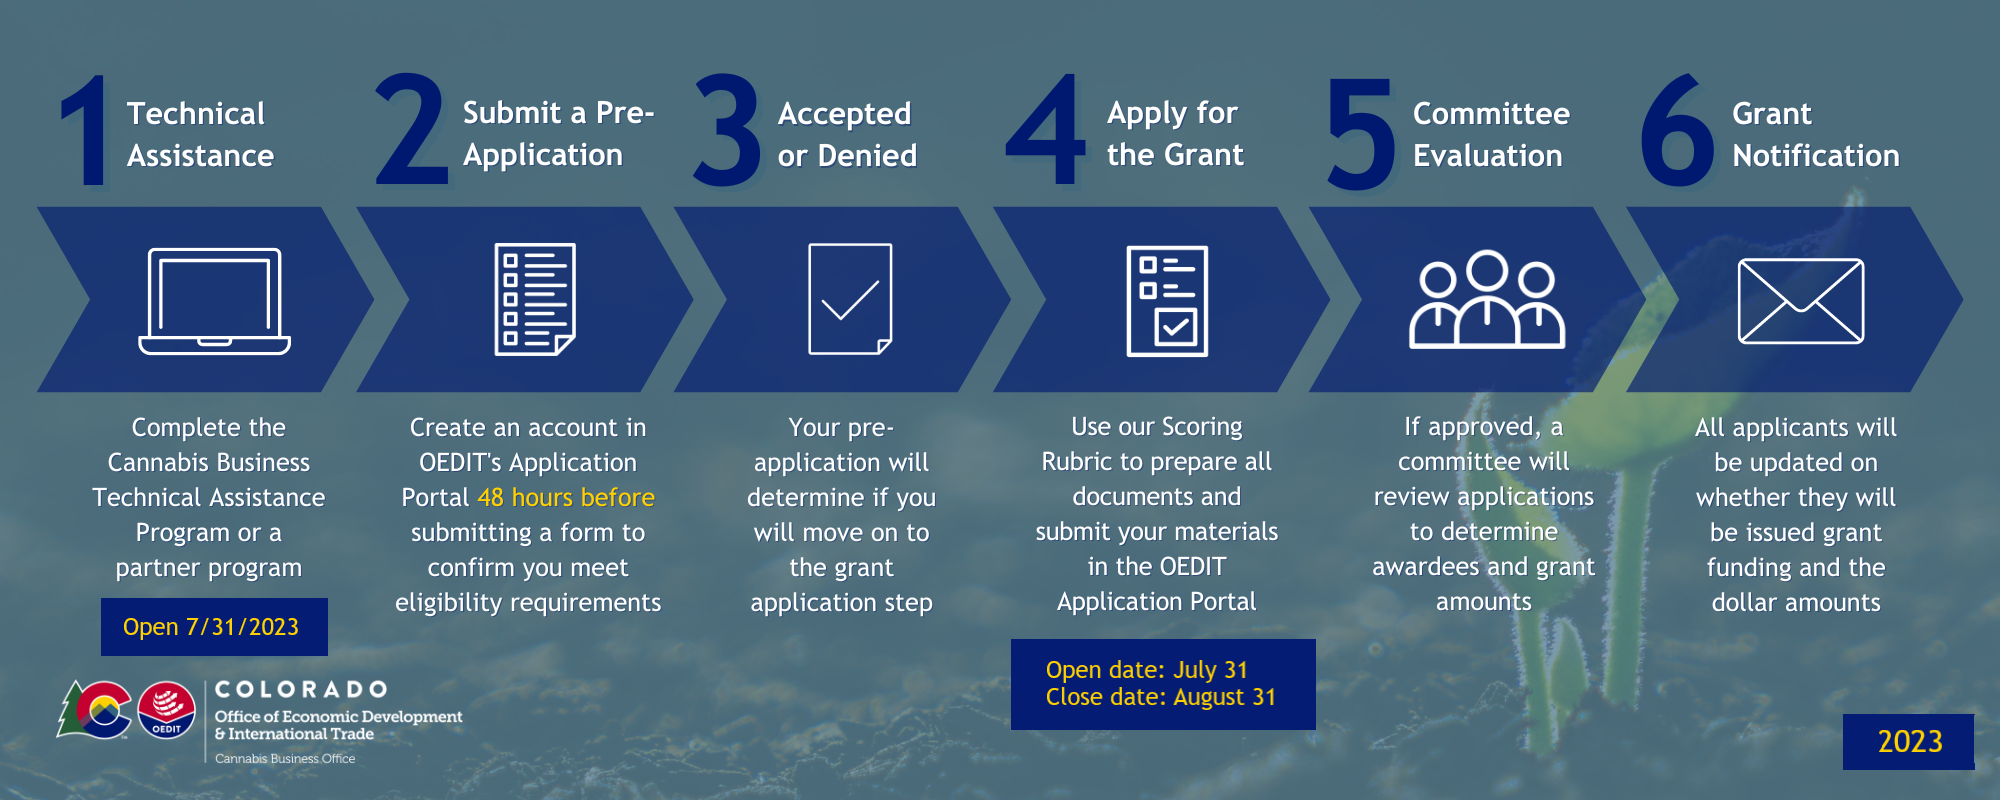 The Application graphic consist of six steps.  1 - Technical Assistance. 2 - Submit a Pre-Application. 3 - Accepted or Denied. 4 - Apply for a Grant. 5 - Committee Evaluation. 6 - Grant Notification